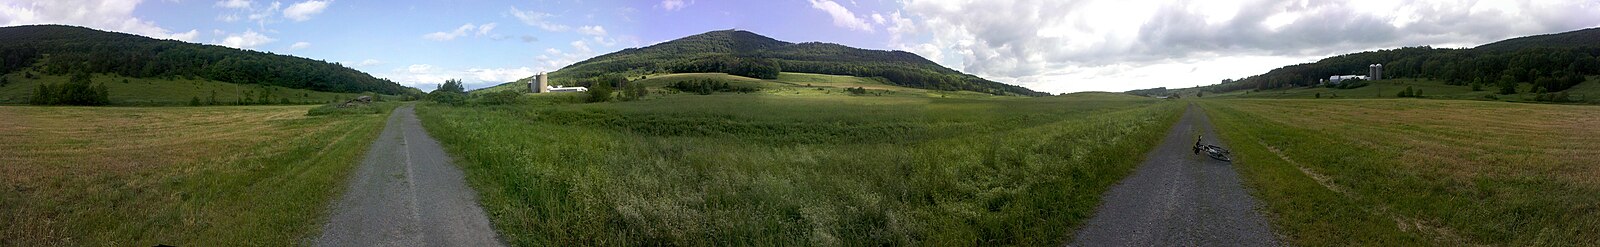 360 degree panorama of the Catskill Scenic Trail showing the trail west and east with a nice view of the surrounding hills